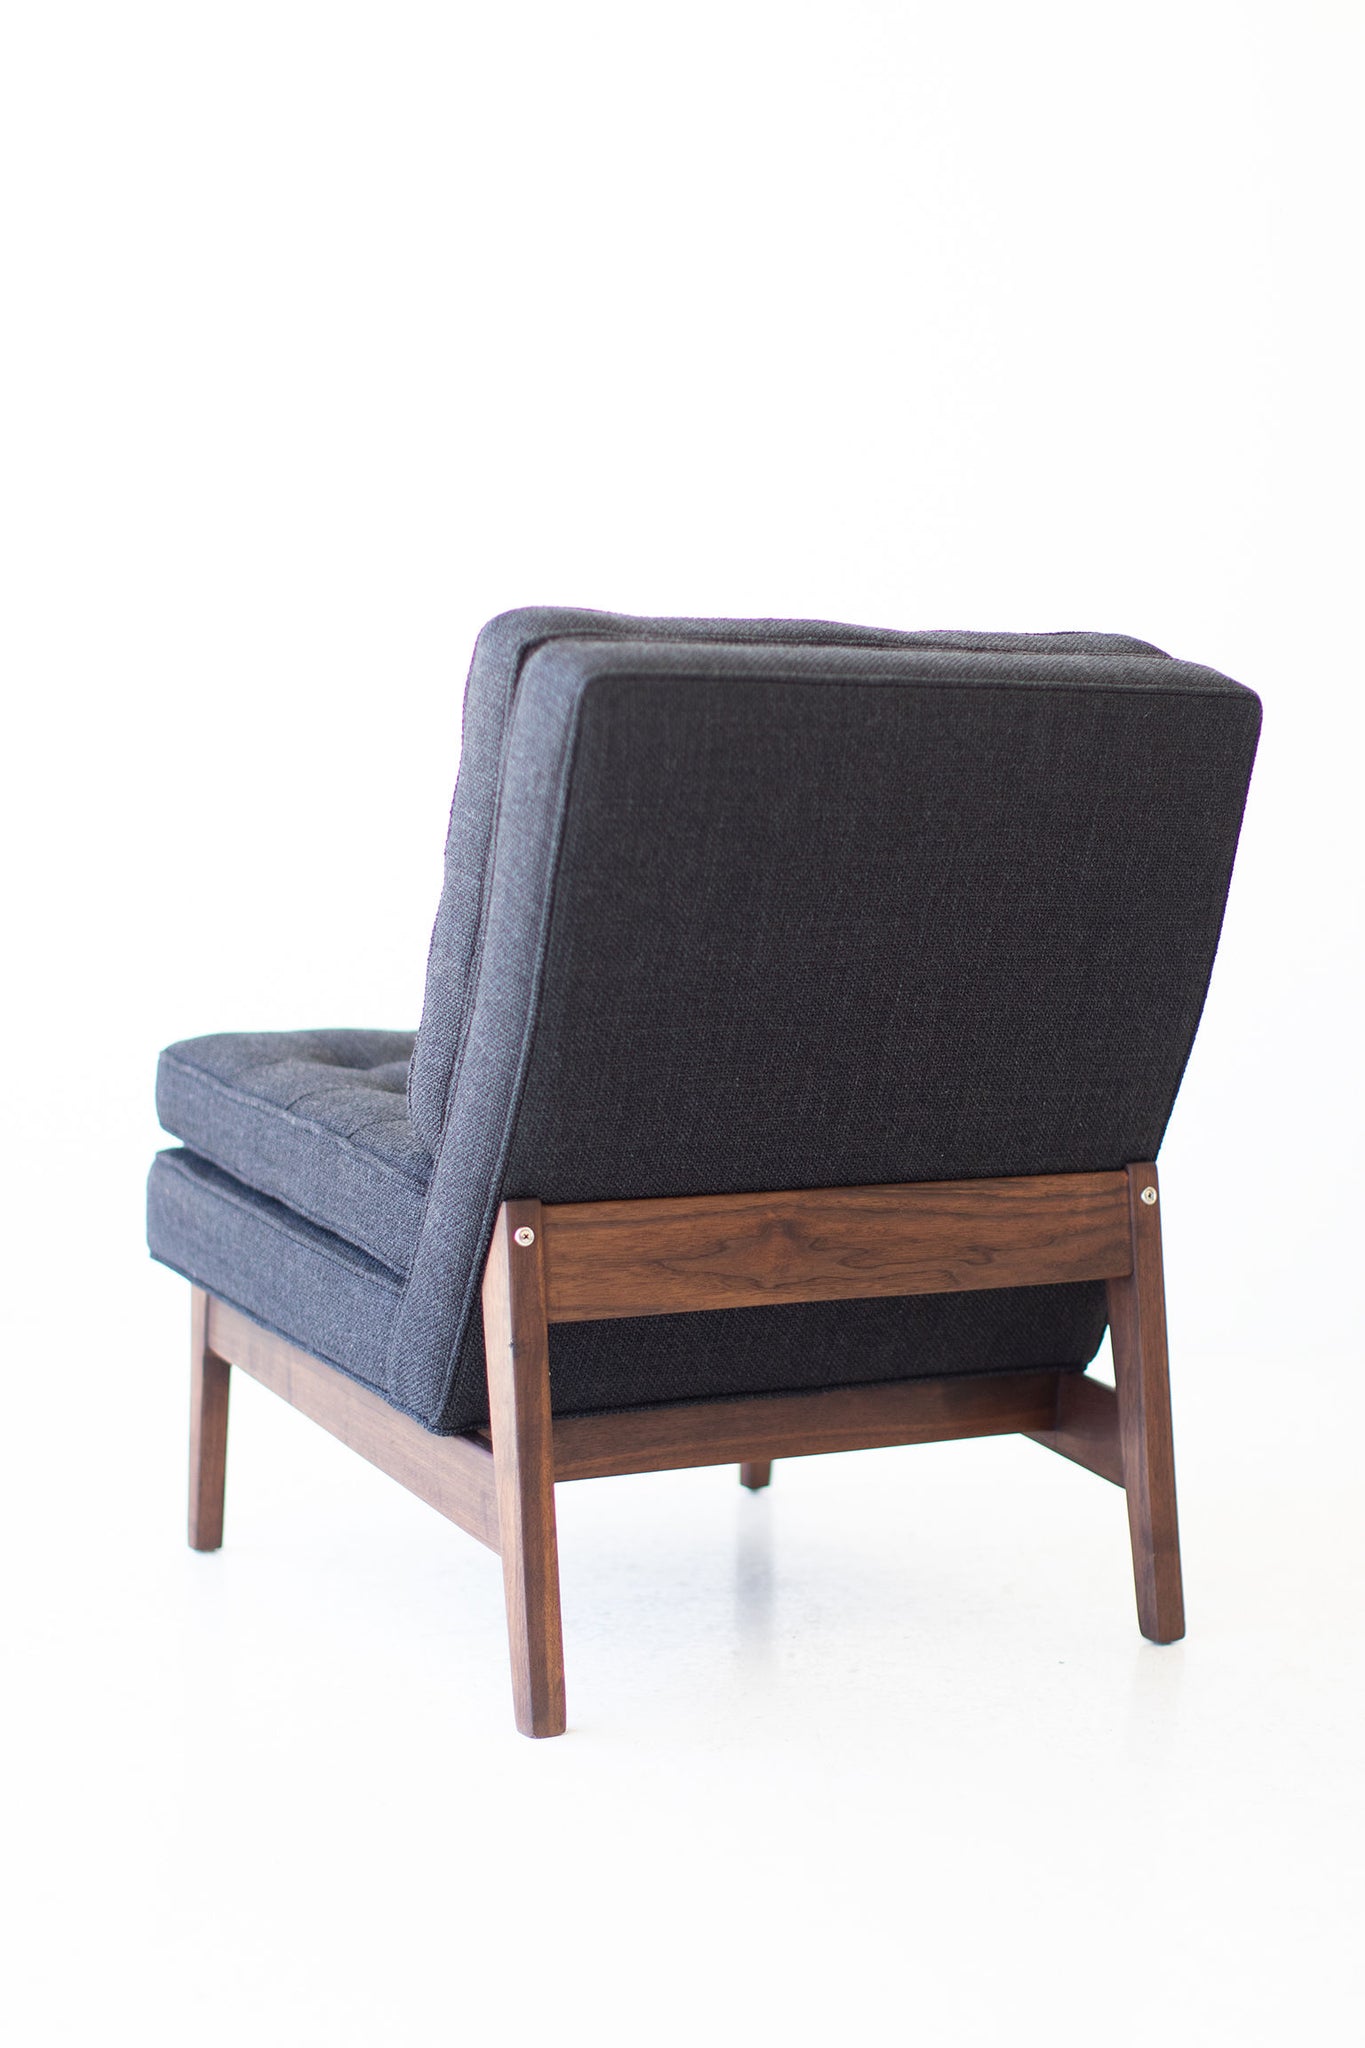 Jack Cartwright Slipper Chair for Founders Furniture